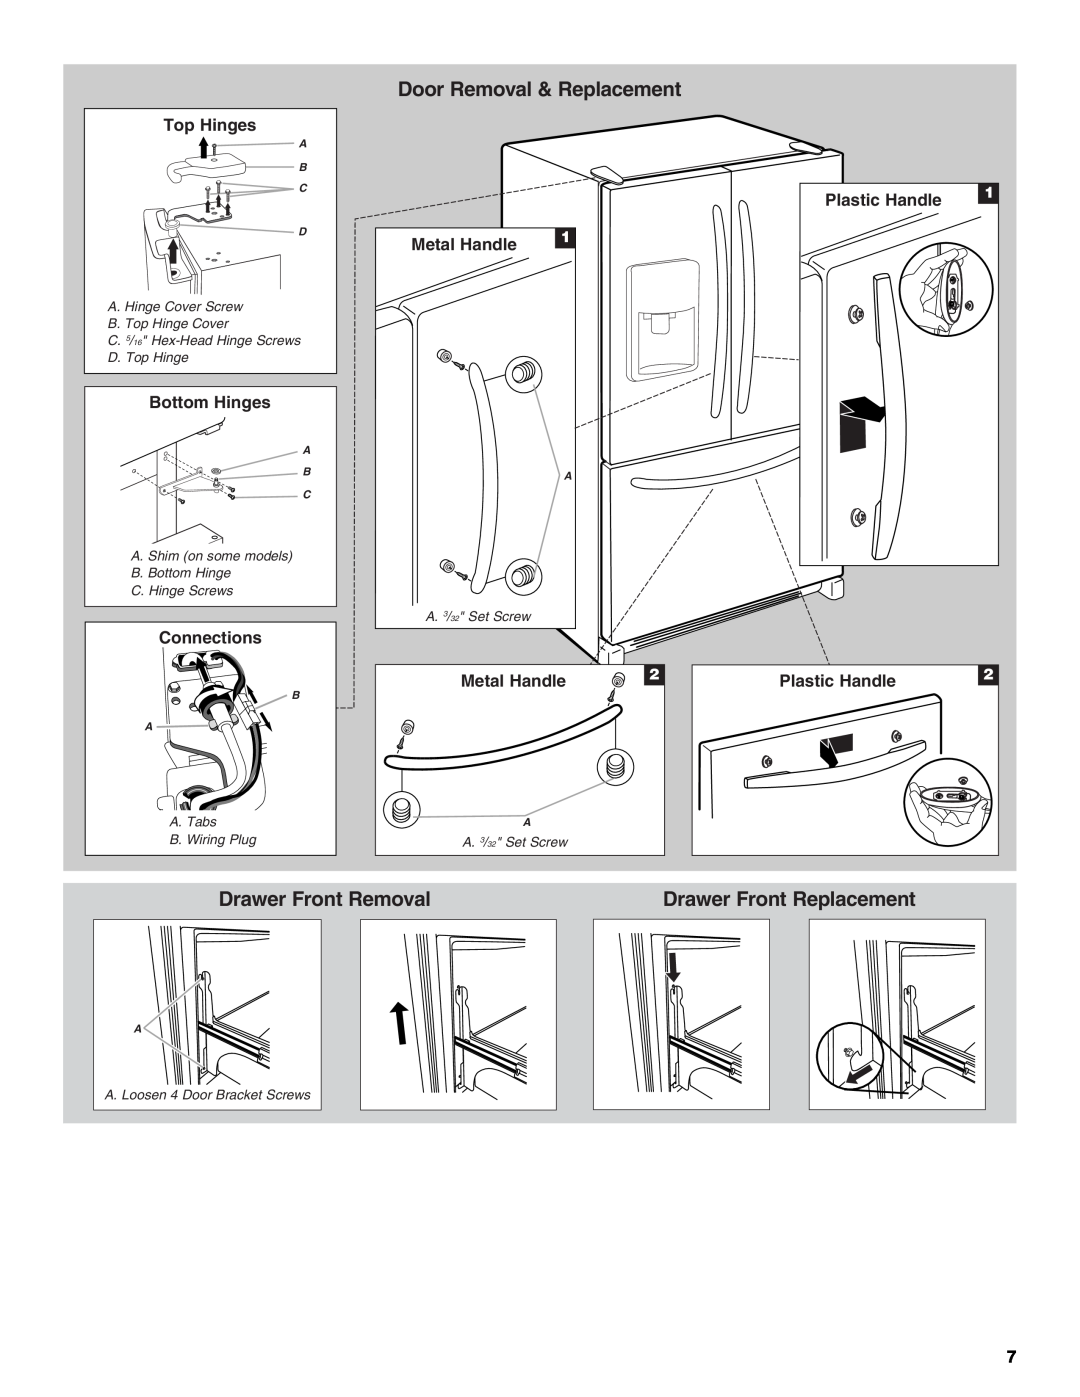 Maytag 12828186A Door Removal & Replacement, Drawer Front Removal, Drawer Front Replacement, Top Hinges, Bottom Hinges 